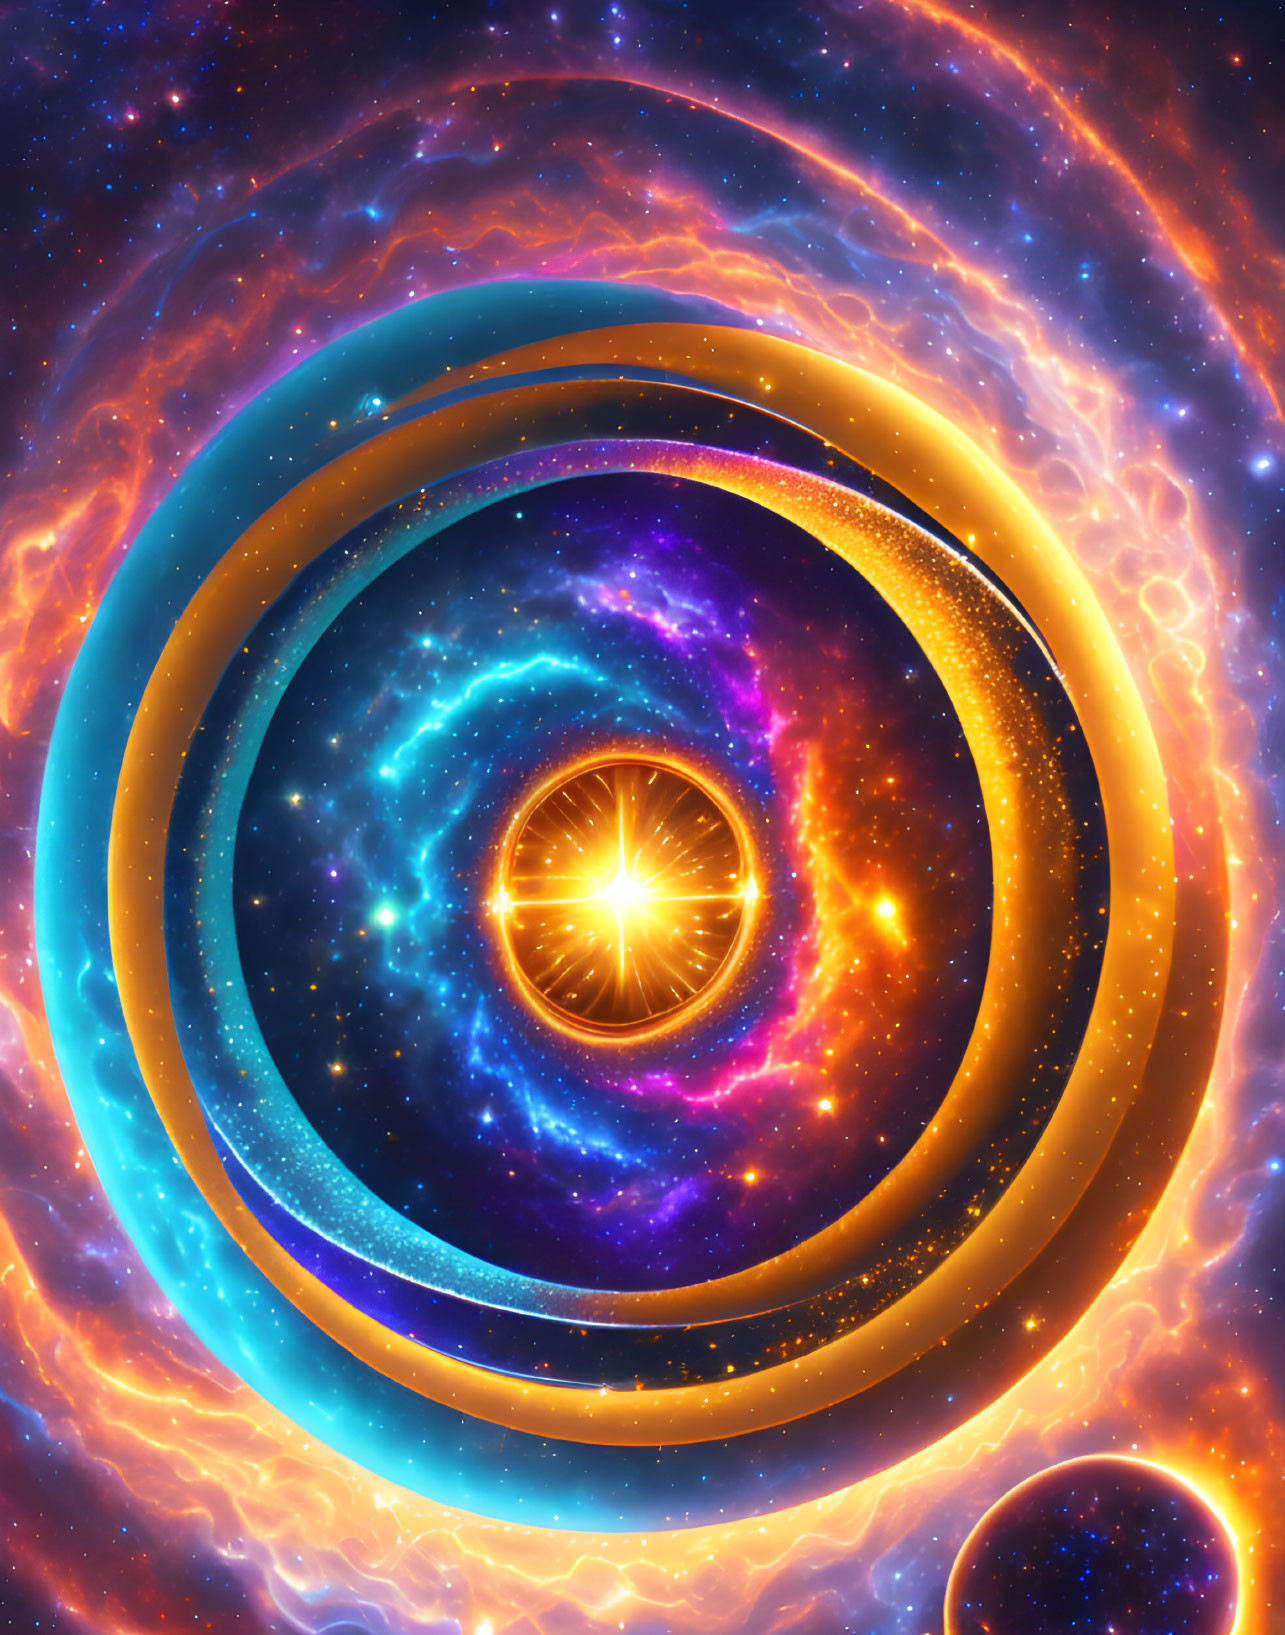 Colorful celestial digital artwork with swirling galaxies and bright stars